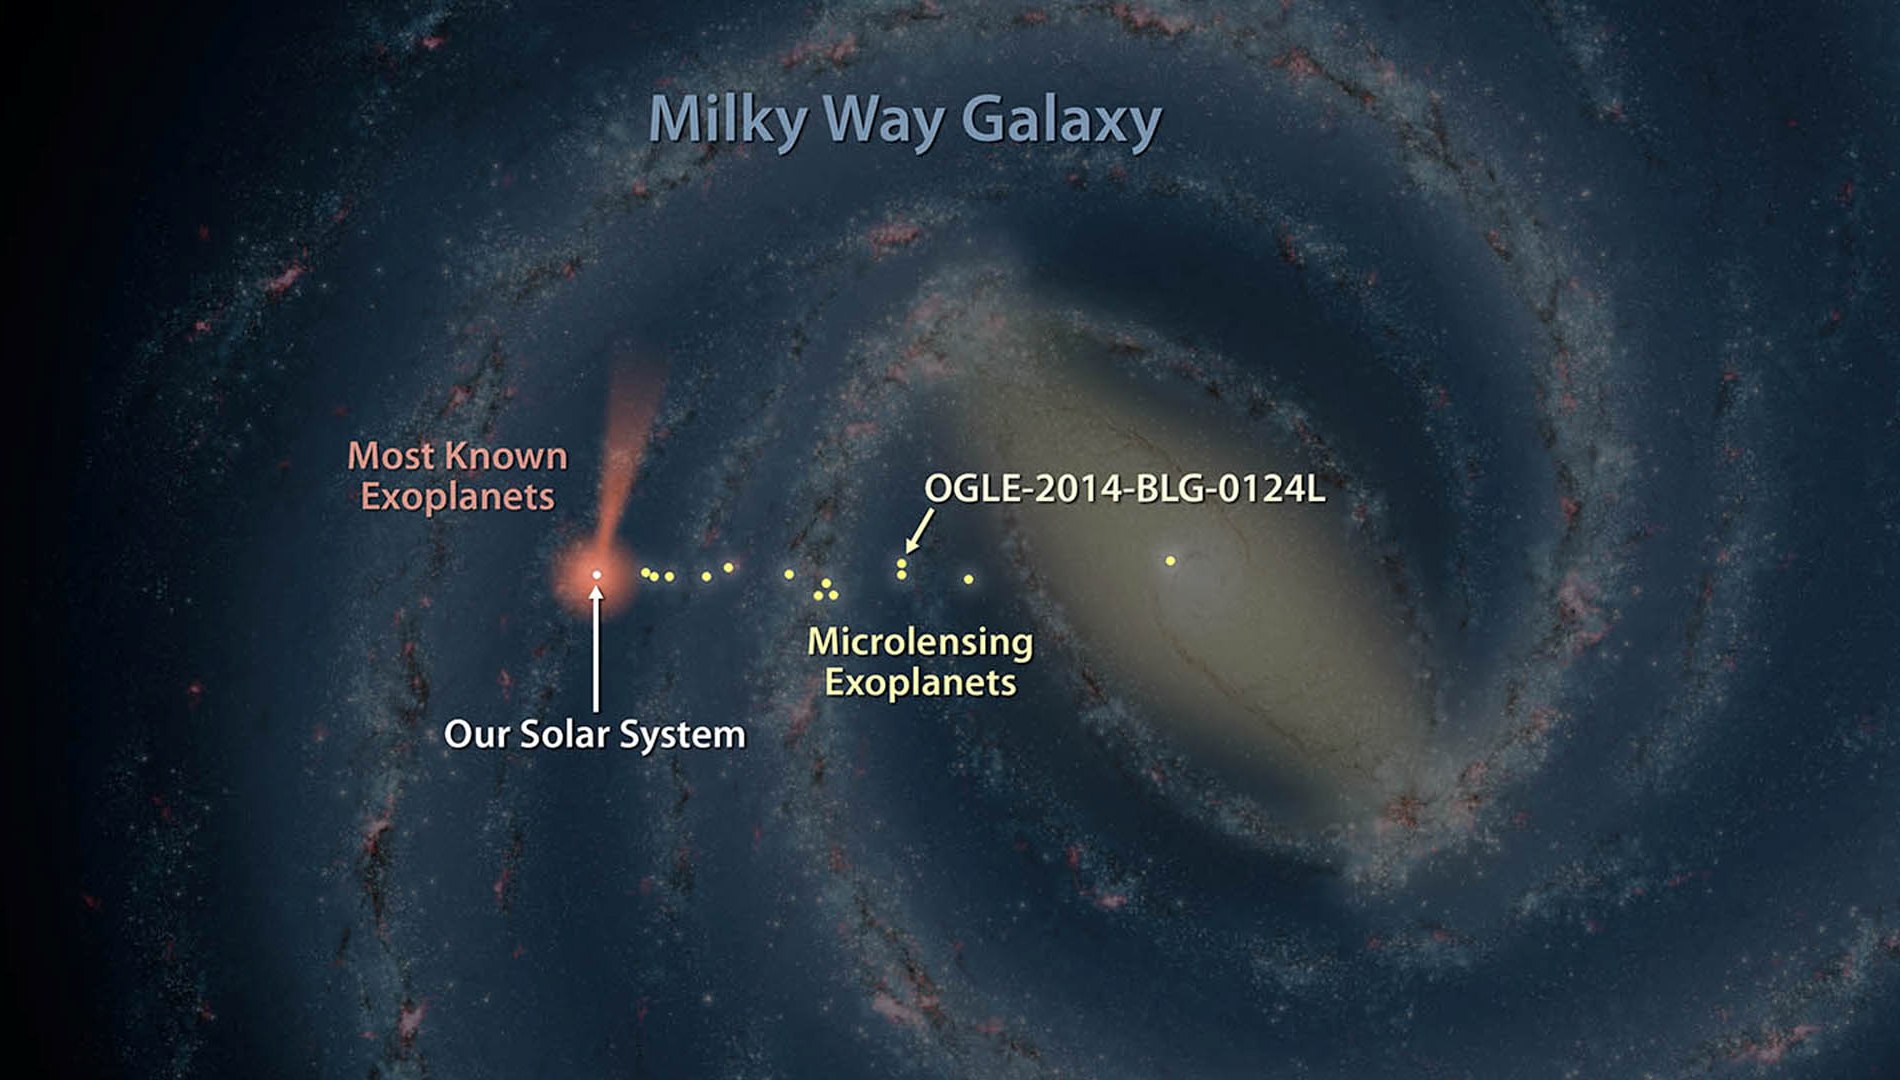 2 of 11. Astronomers have discovered one of the most distant planets known, a gas giant about 13,000 light-years from Earth, called OGLE-2014-BLG-0124L. The planet was discovered using a technique called microlensing, and the help of NASA's Spitzer Space Telescope and the Optical Gravitational Lensing Experiment, or OGLE. In this artist's illustration, planets discovered with microlensing are shown in yellow. The farthest lies in the center of our galaxy, 25,000 light-years away. [Credit: NASA/JPL-Caltech/R. Hurt (IPAC)]